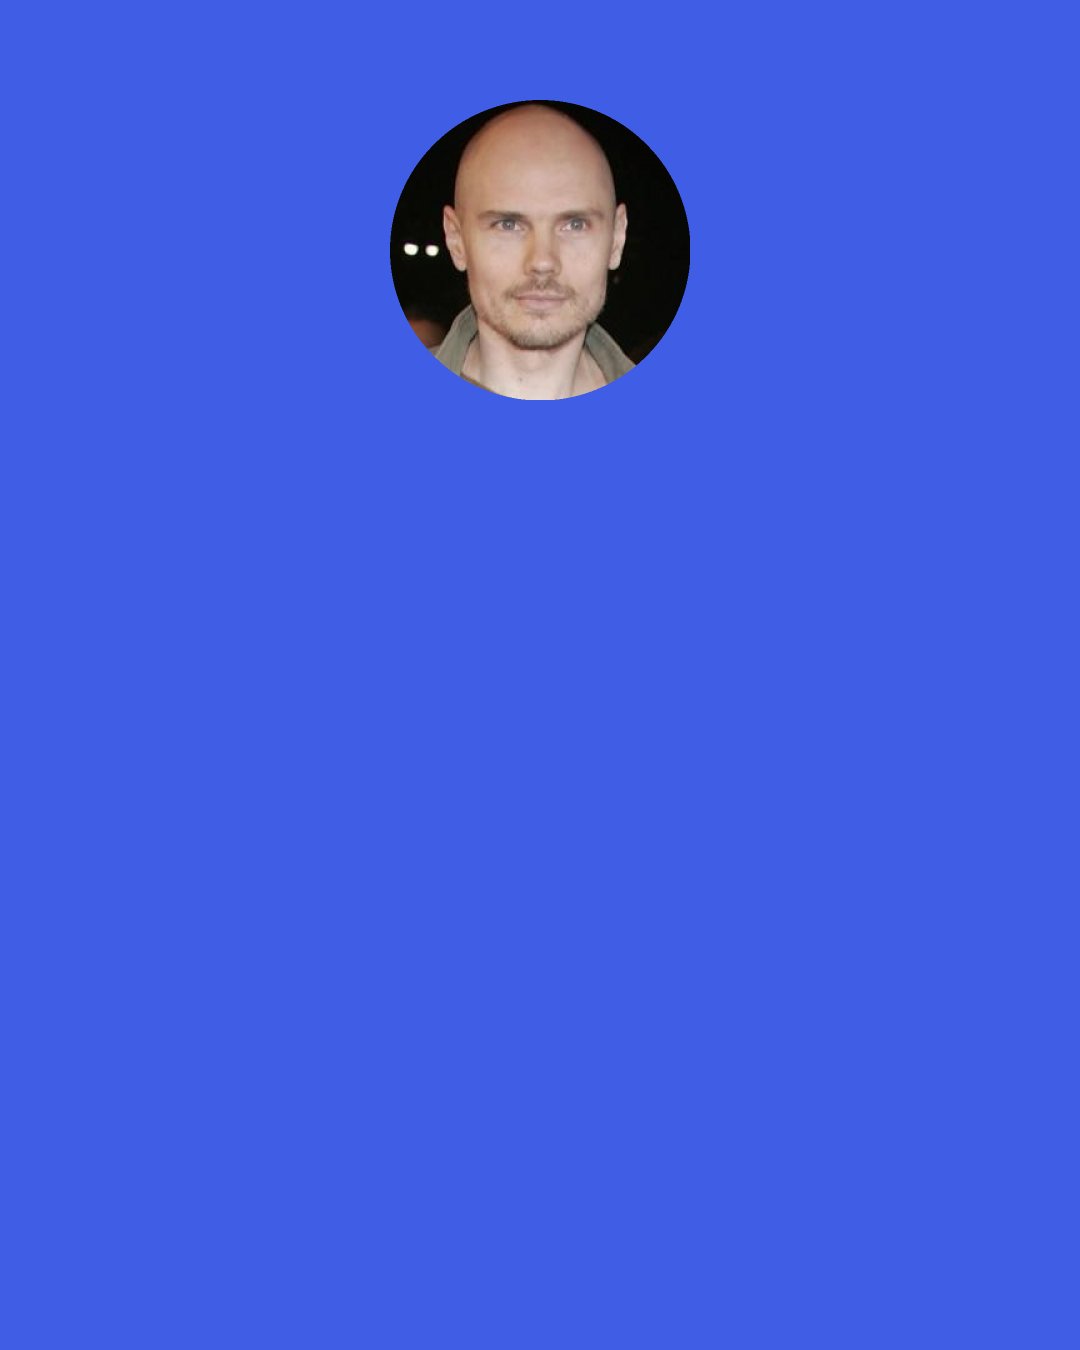 Billy Corgan: You give me a @#$%& kazoo and I'll write you a good song.